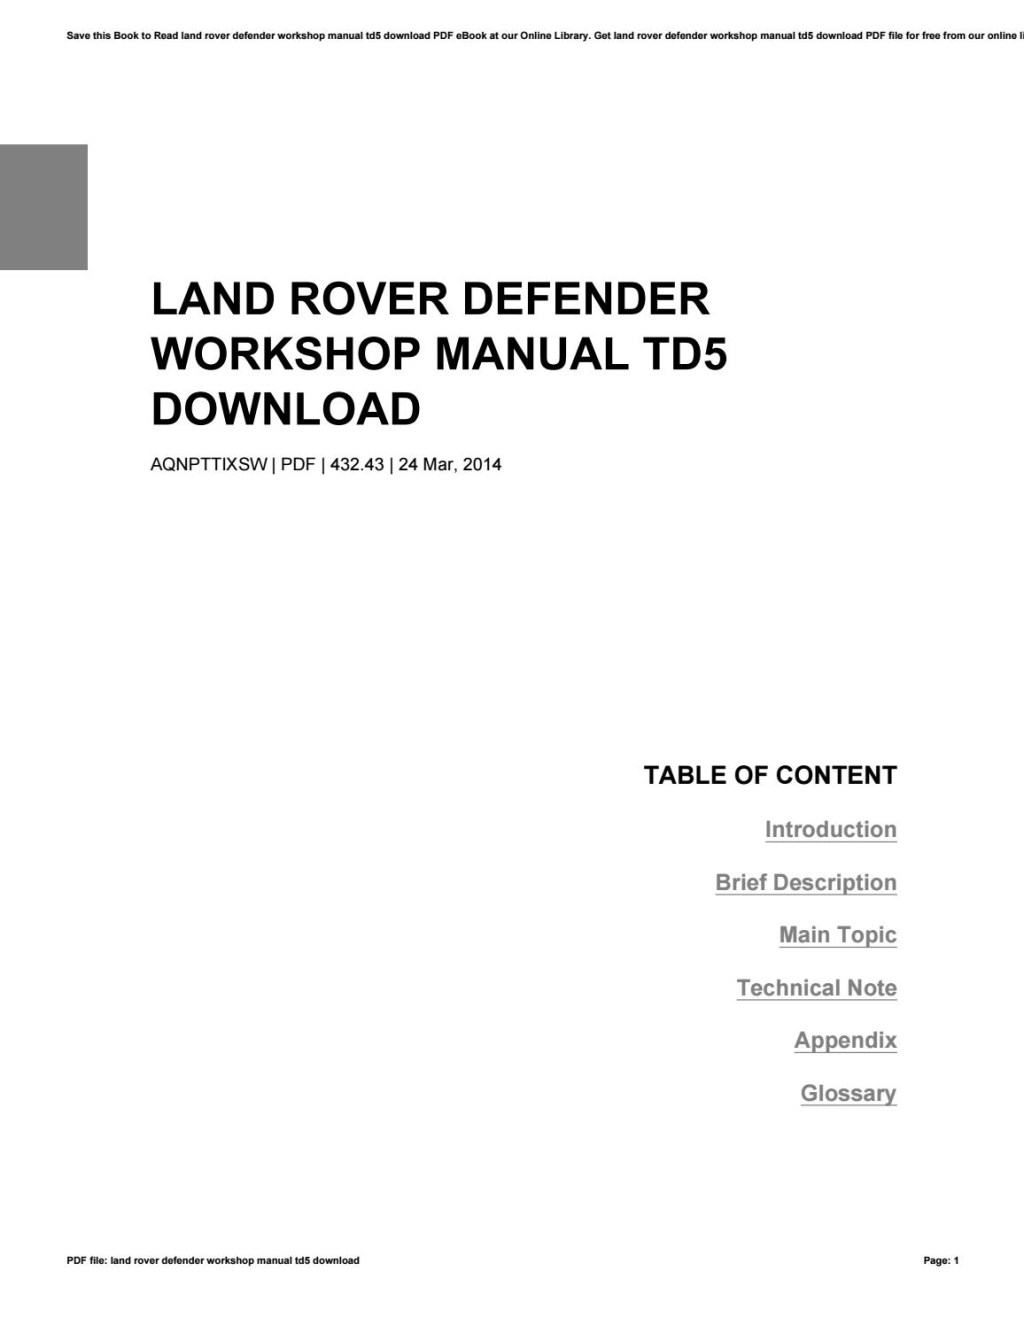 Picture of: Land rover defender workshop manual td download by mgibson – Issuu